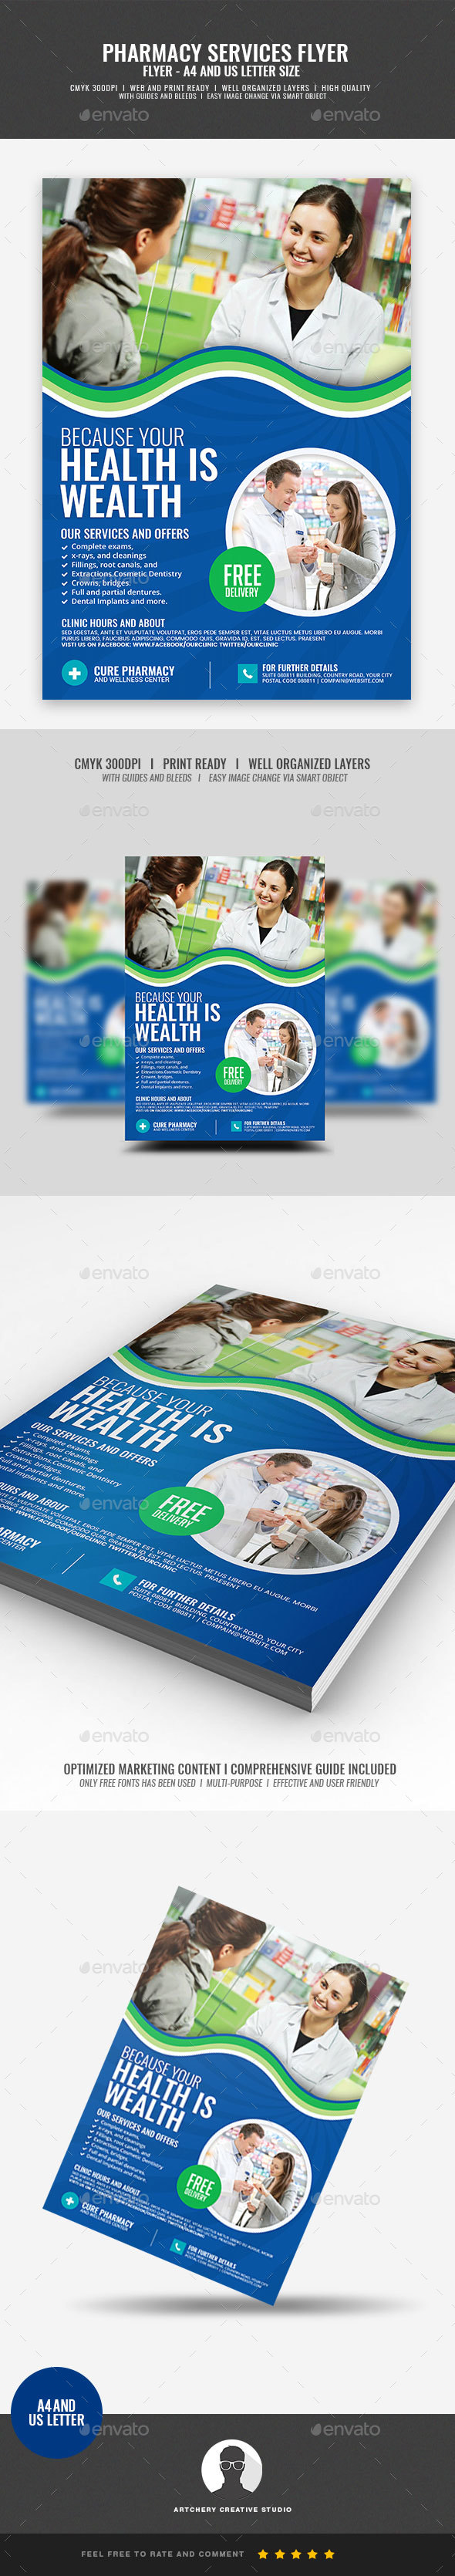 Pharmaceutical Services Flyer